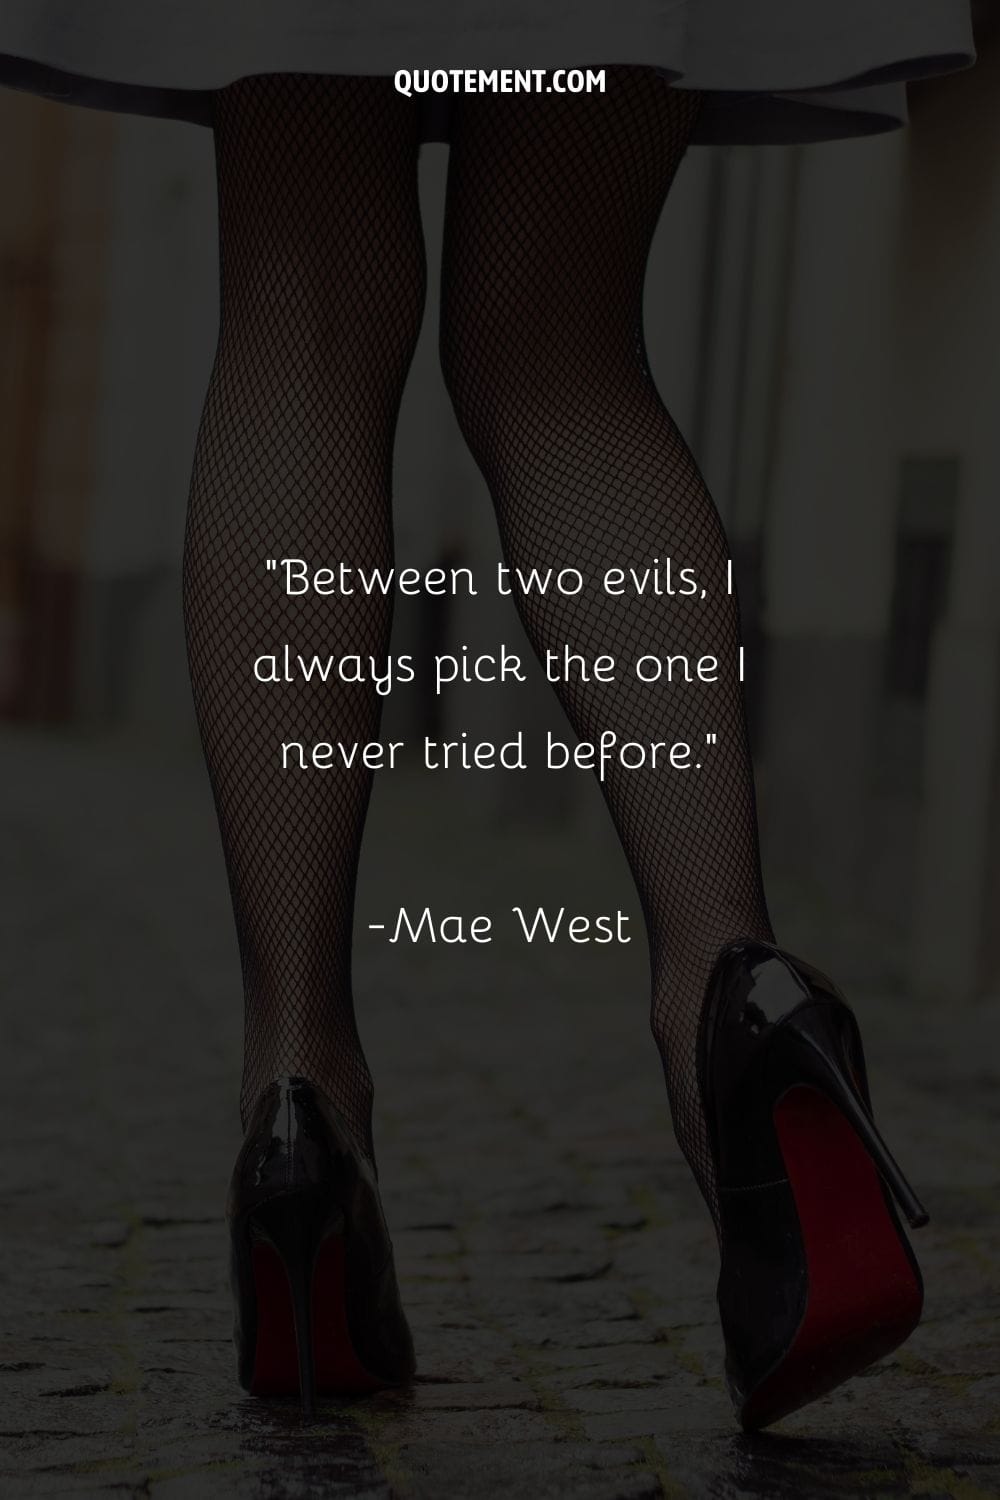 Image of a woman stepping gracefully in high heels representing savage quote.